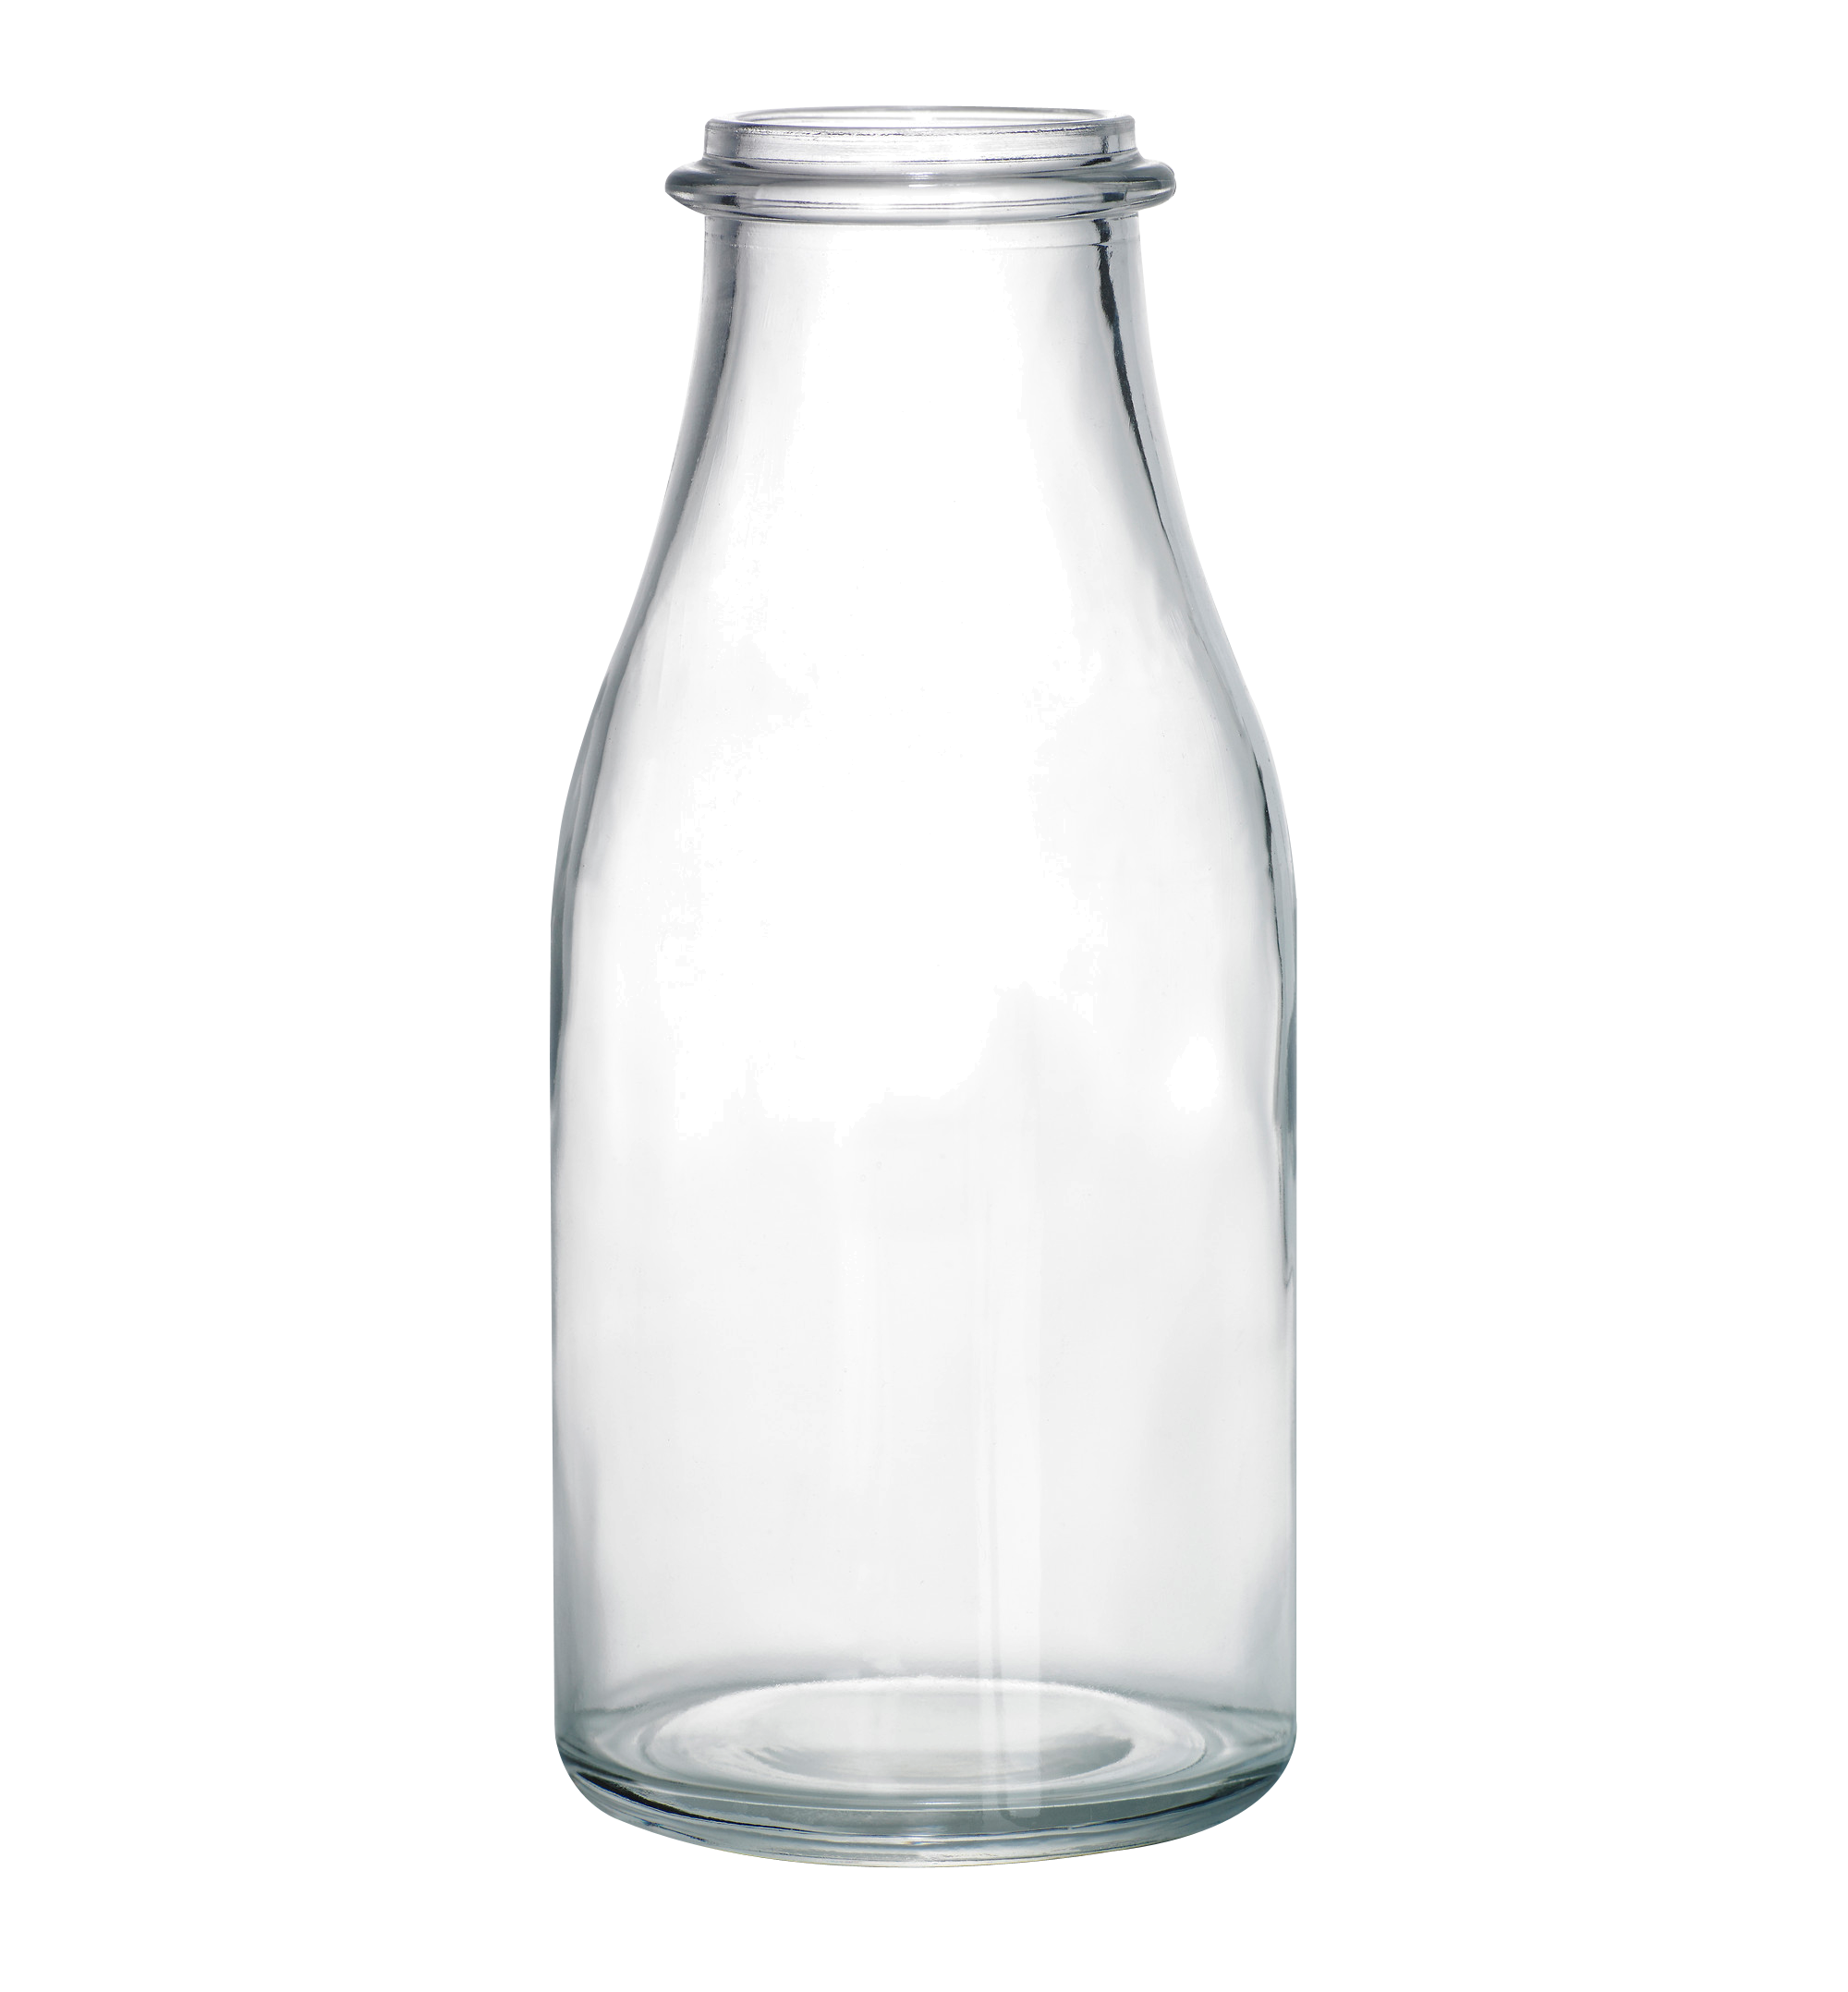 Glass Bottle Empty Picture HQ Image Free PNG Image